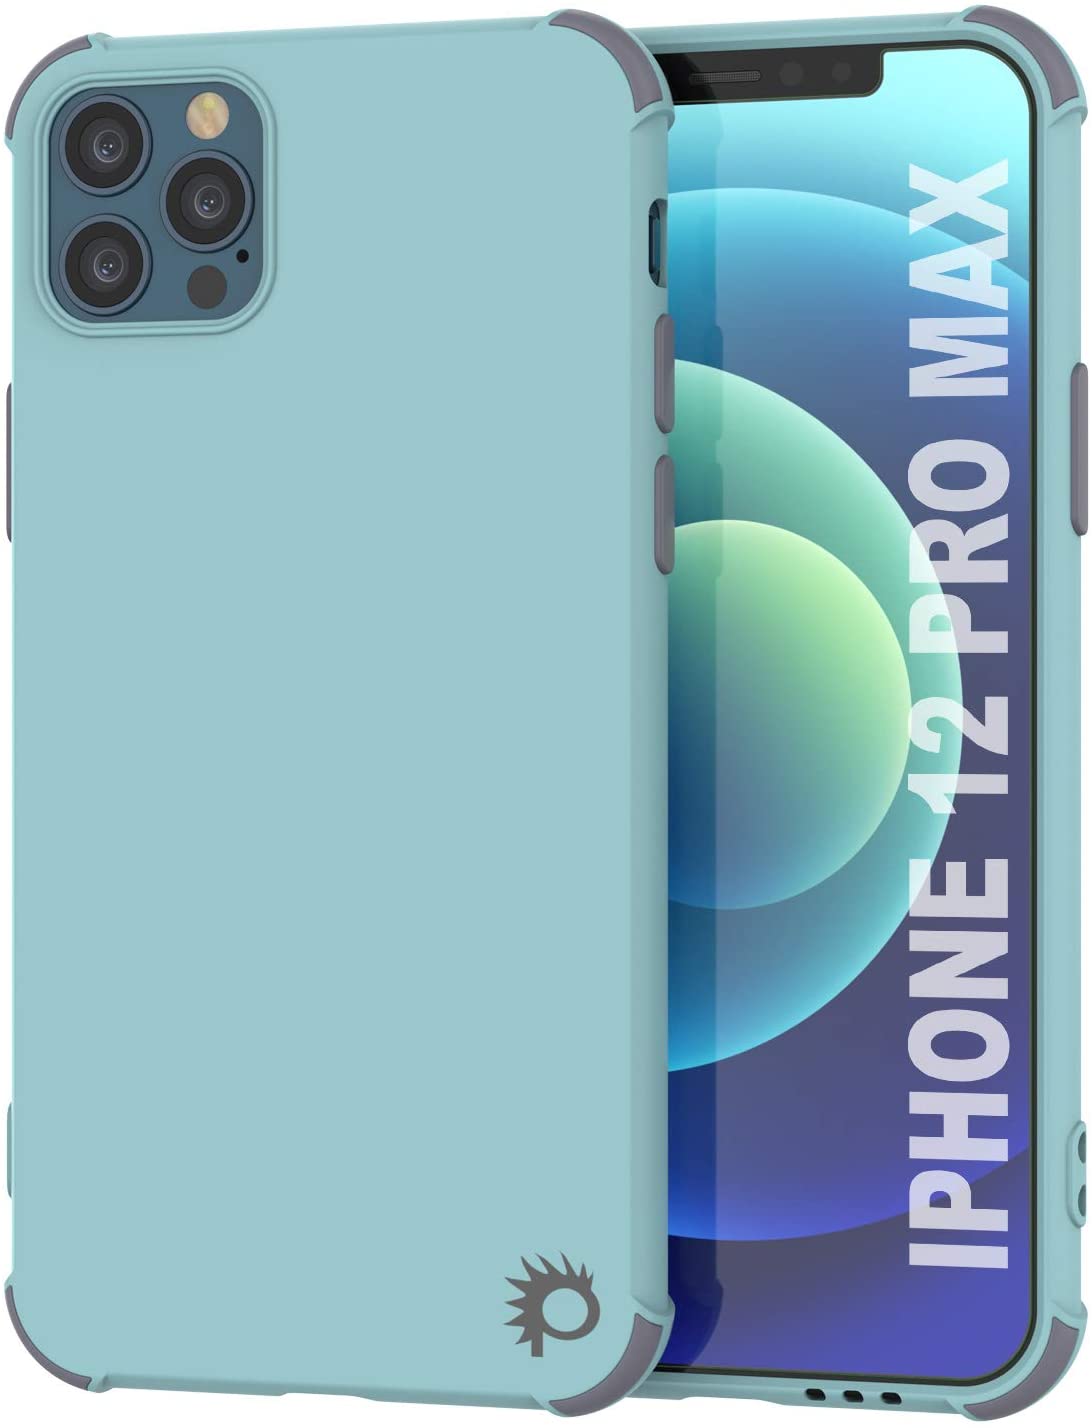 Punkcase Protective & Lightweight TPU Case [Sunshine Series] for iPhone 12 Pro Max [Teal] (Color in image: Teal)